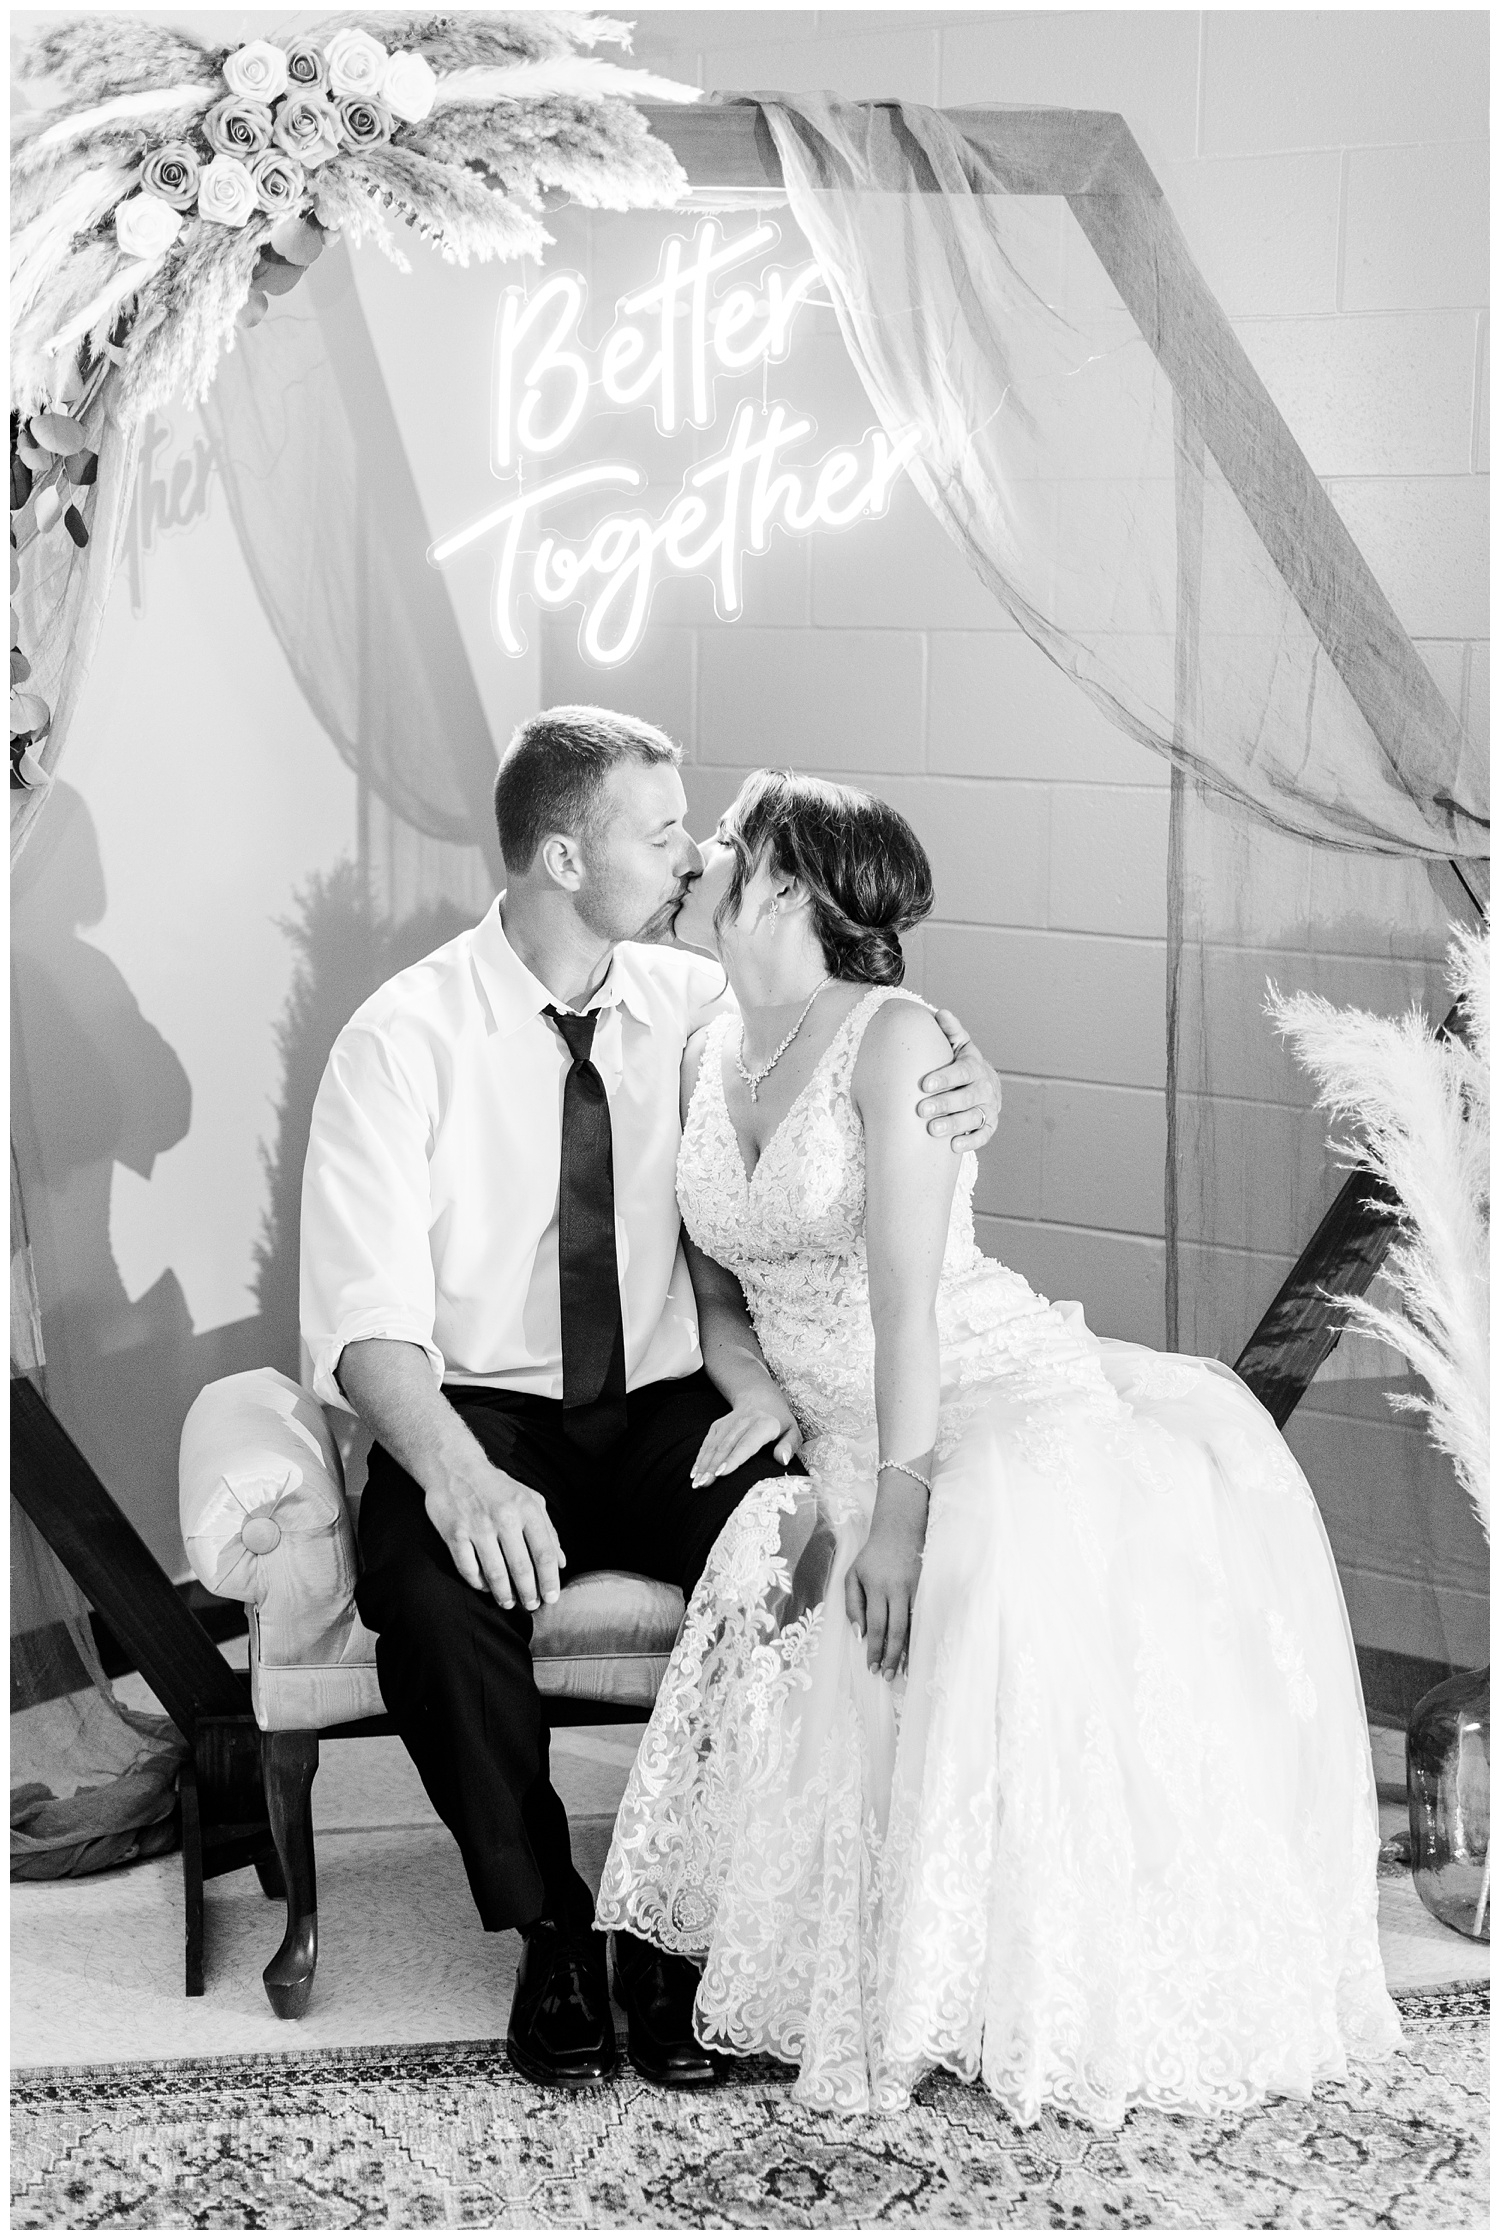 Mr. & Mrs. Redmond kiss under a custom boho themed photo backdrop featuring a wooden hexagon arch with draping cloths, "Better Together" neon sign, rose and pampas grass arrangements, antique rug and vintage settee | CB Studio